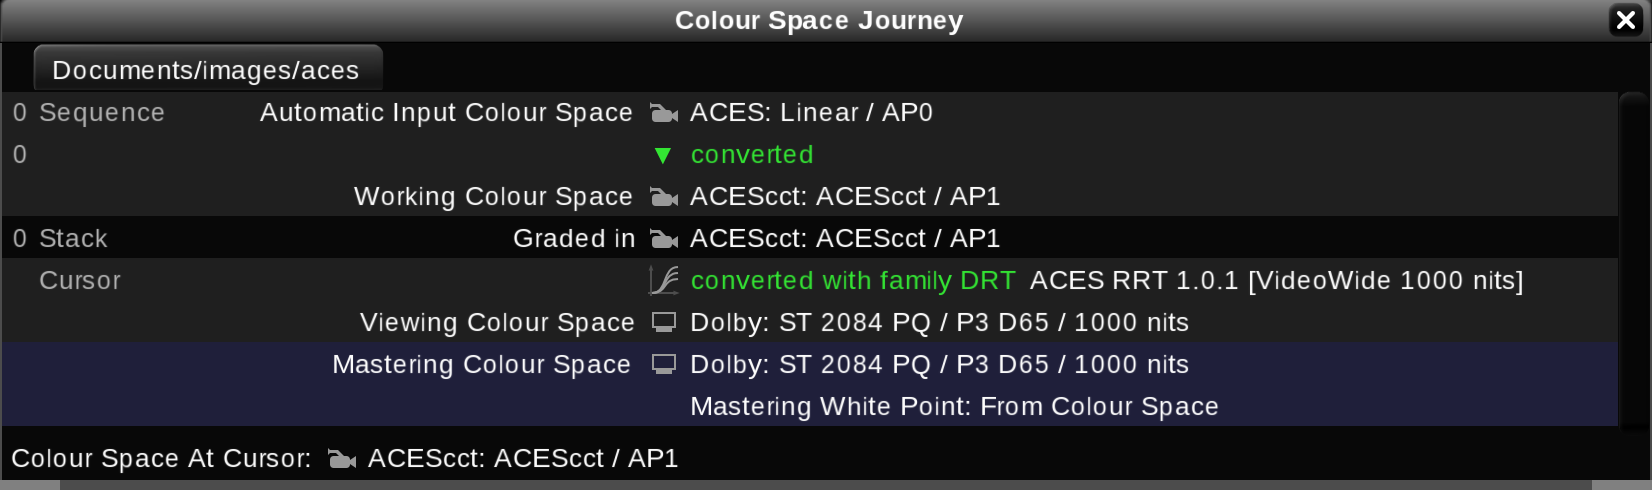 Color Managed Workflow in Baselight_Image05.png